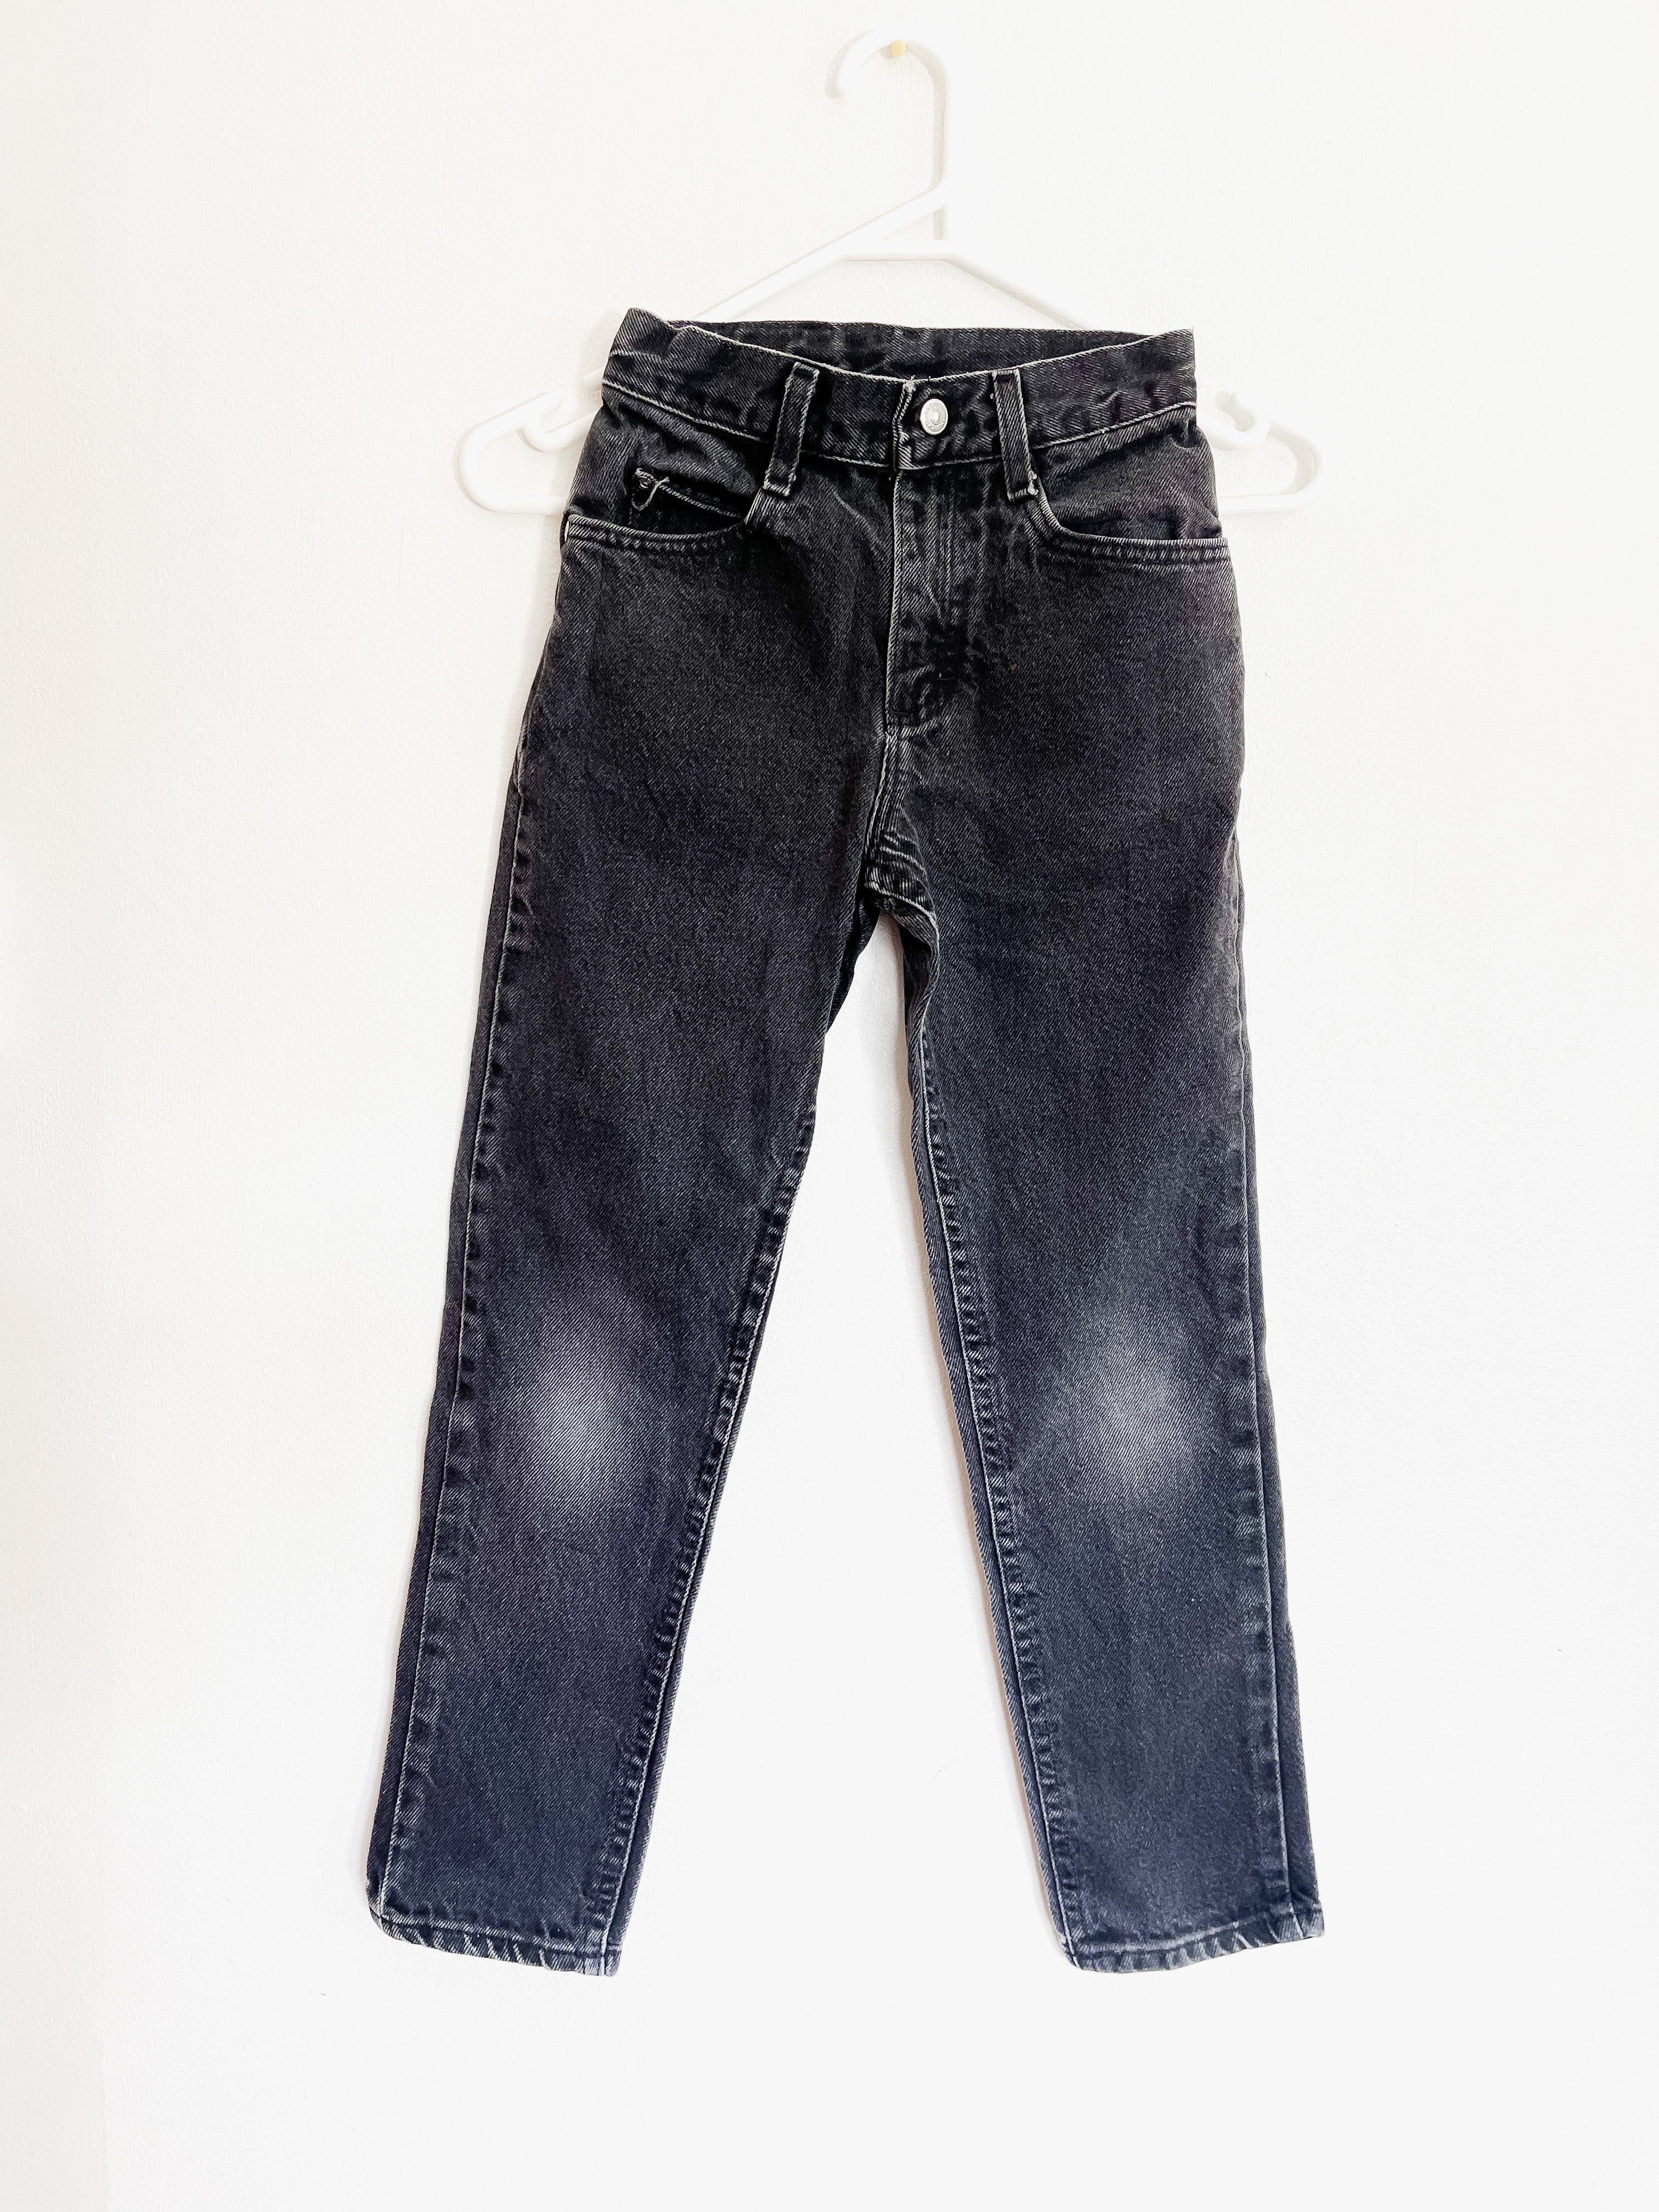 Vintage Lee union USA made jeans 80's - 90's (8y)